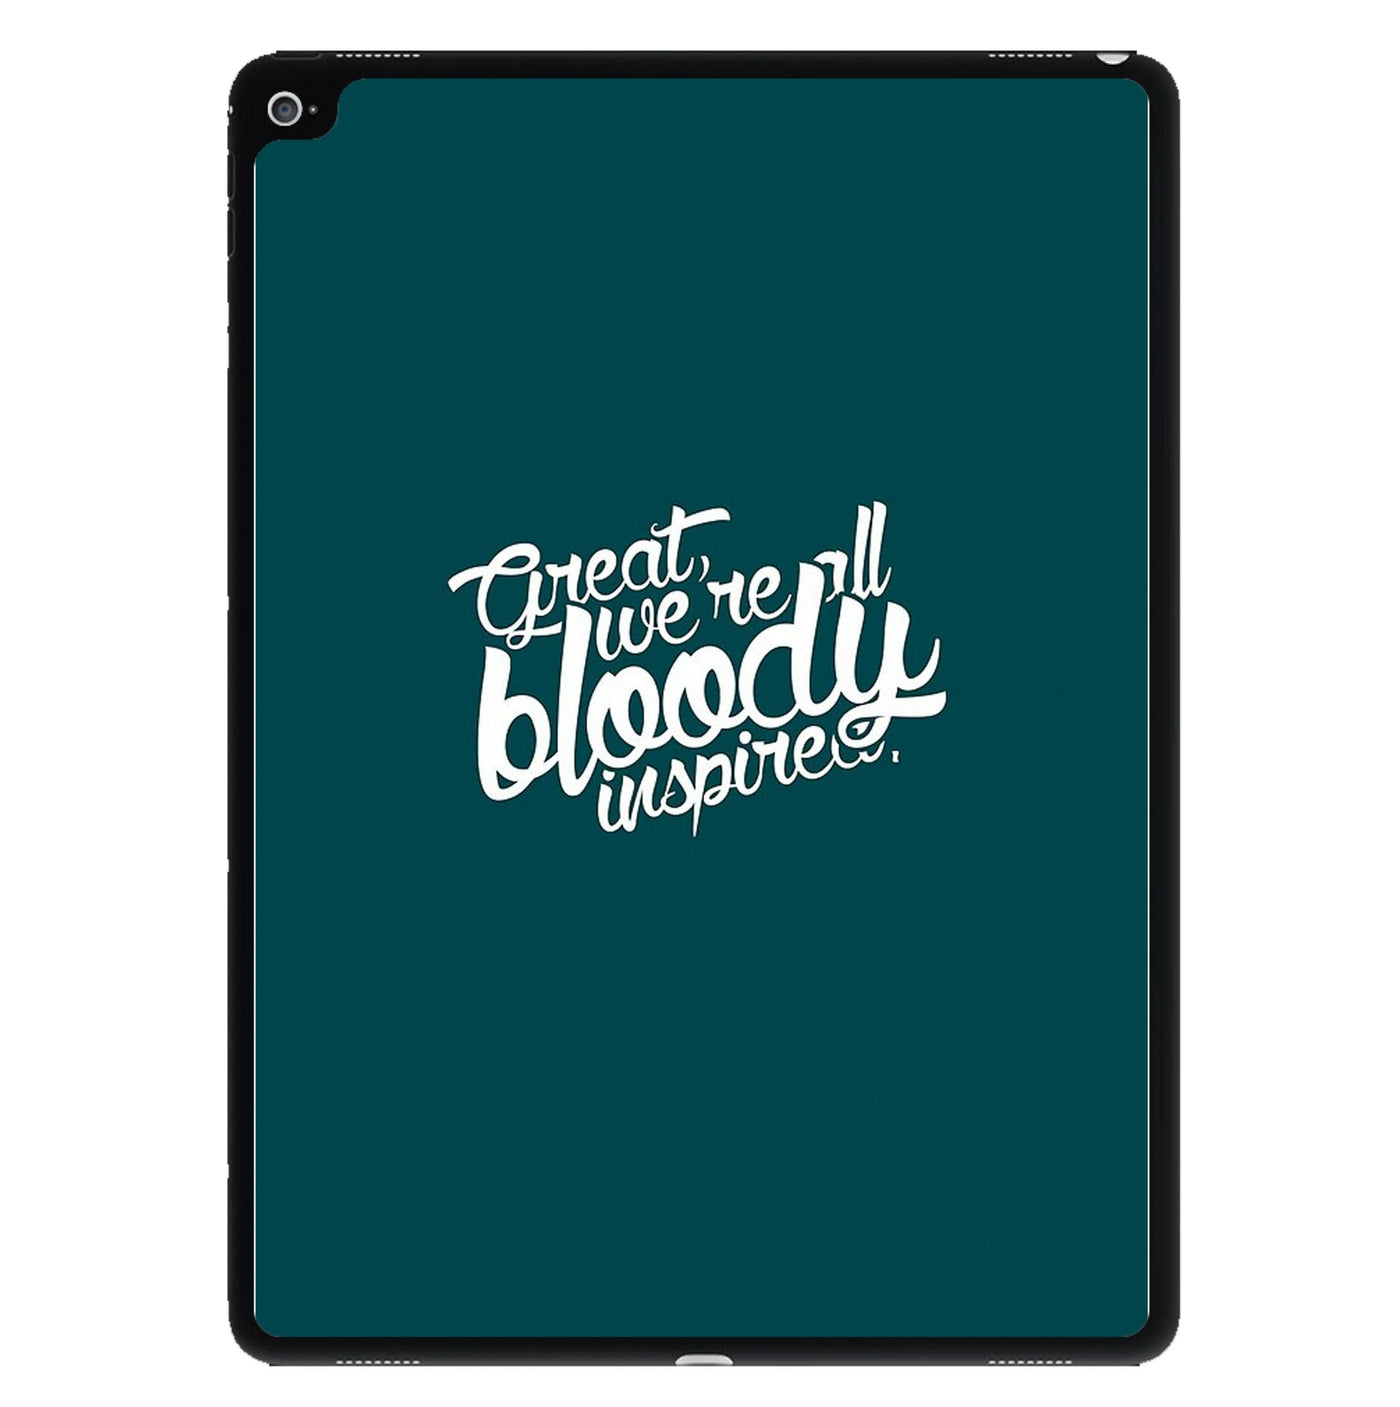 Great, We're All Bloody Inspired - Maze Runner iPad Case